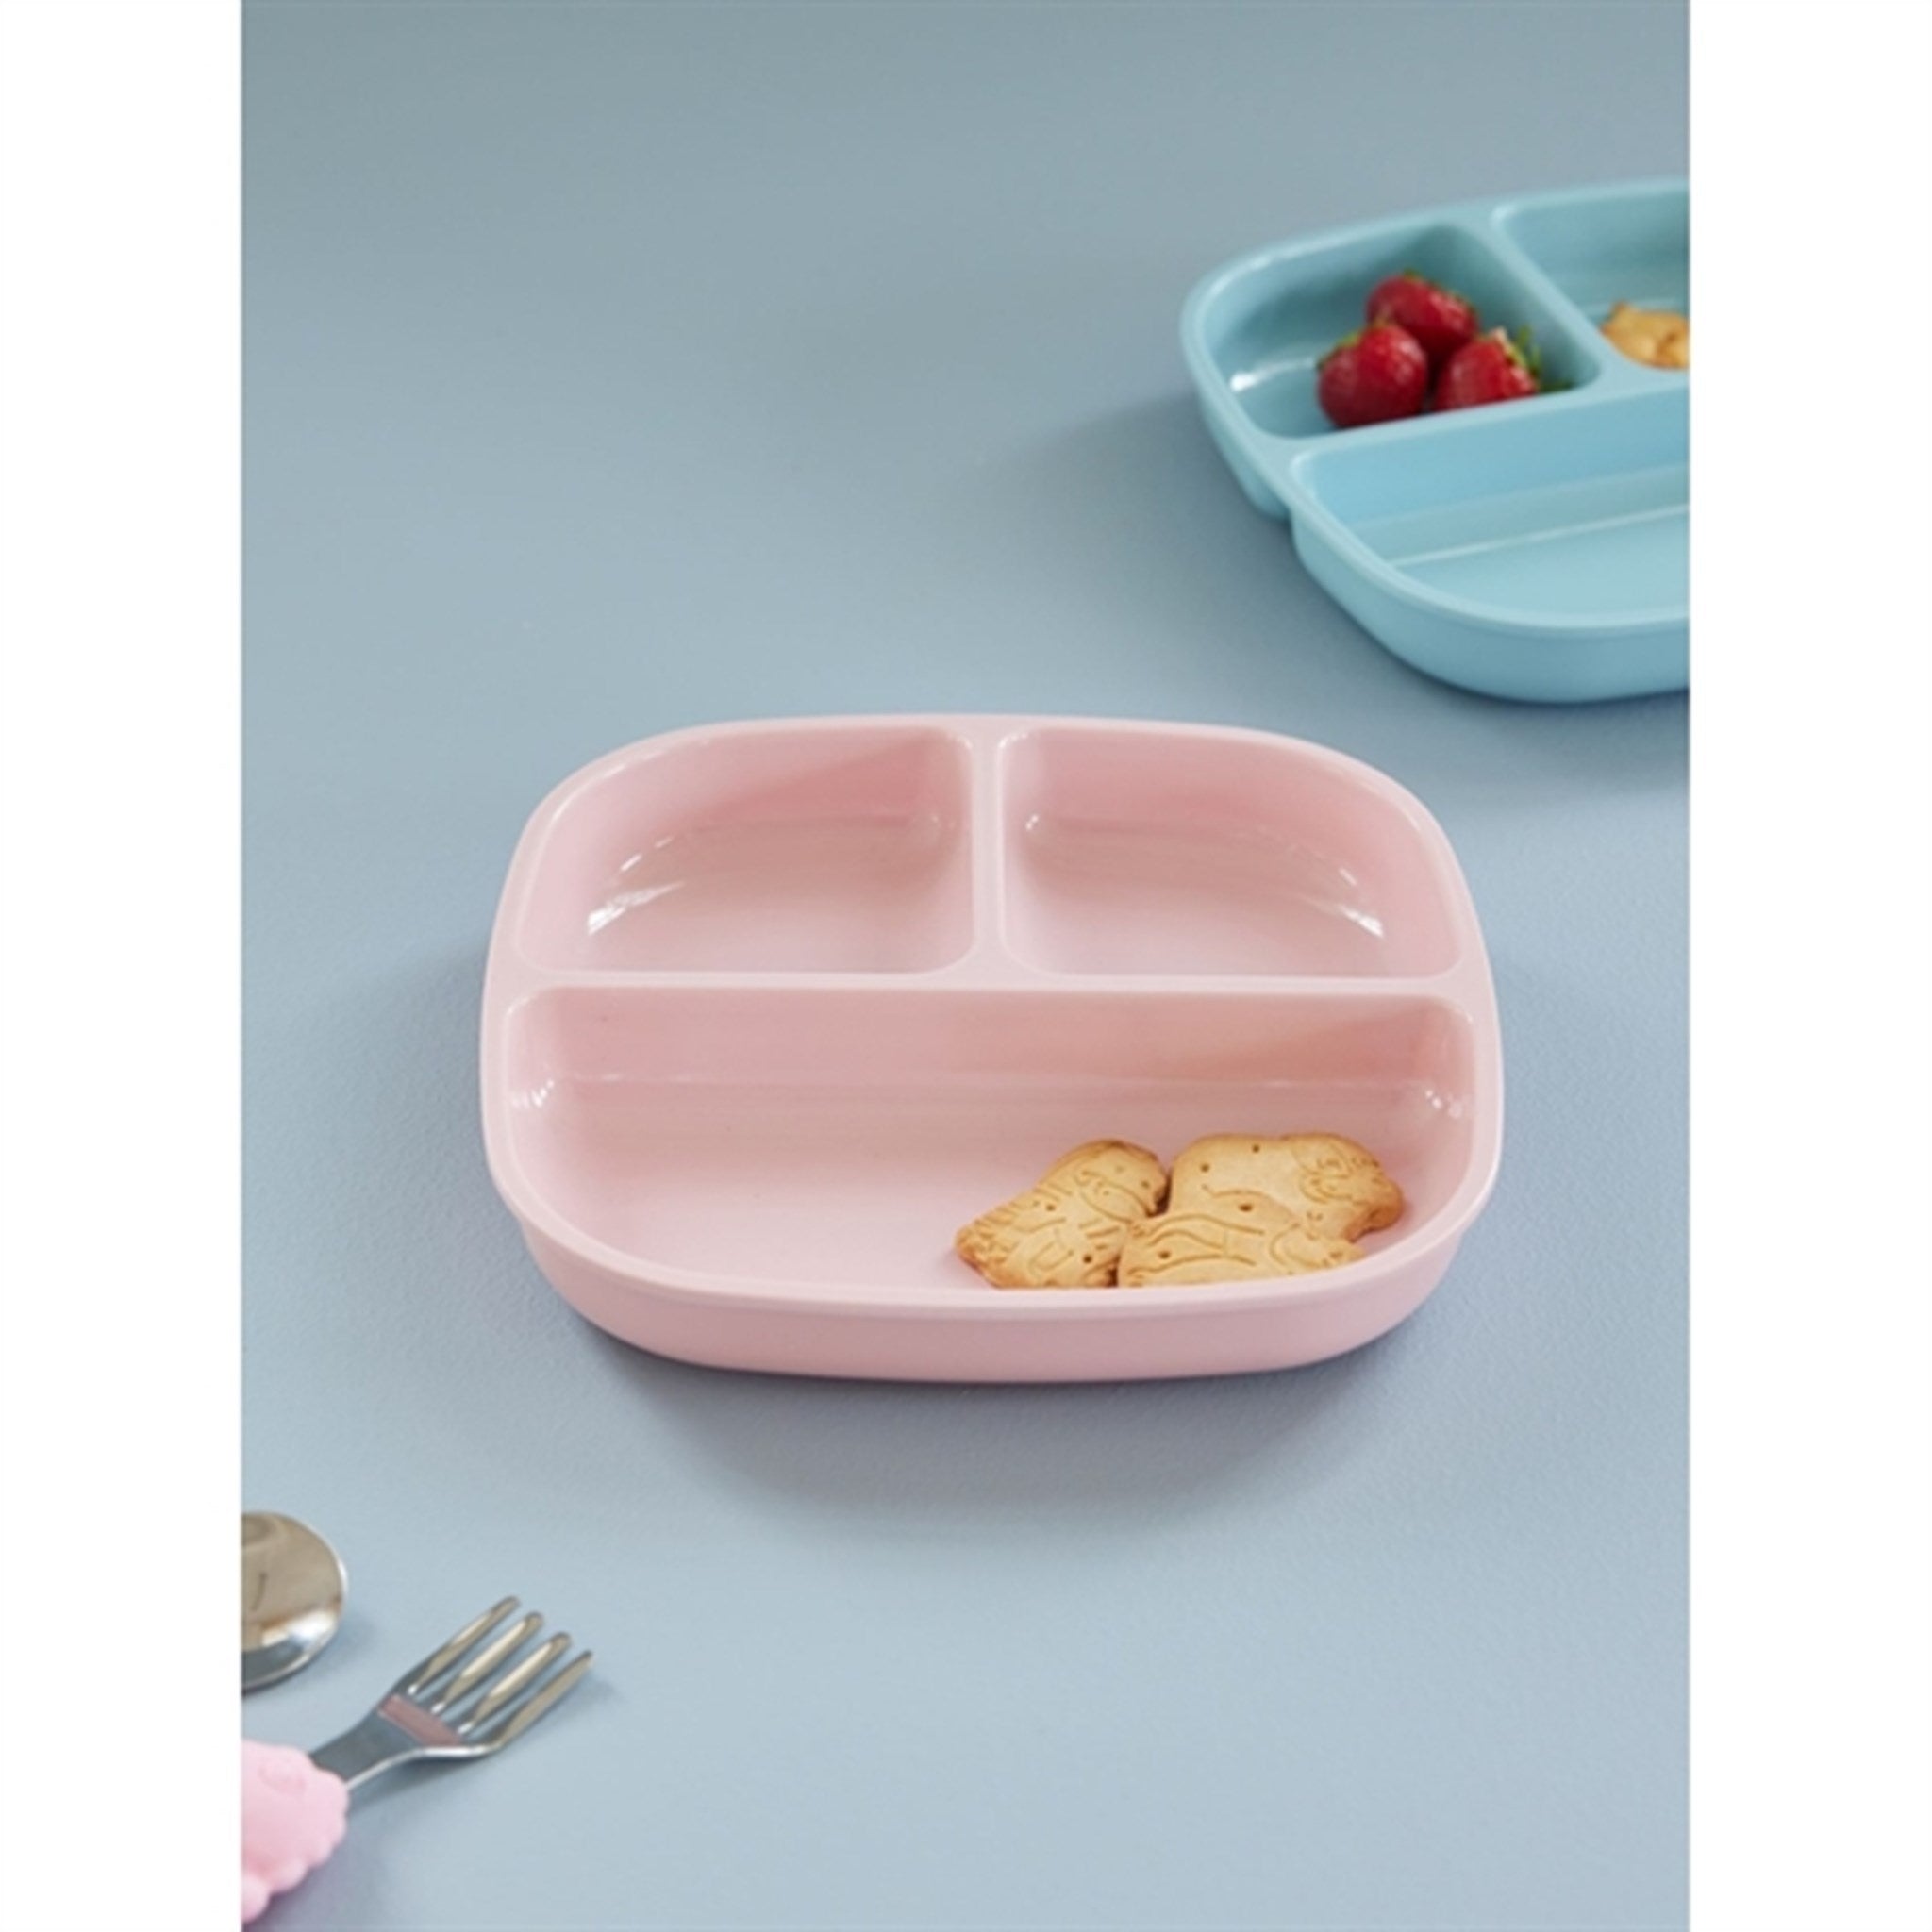 RICE Soft Pink Melamine Childrens Plate with 3 Rooms 2